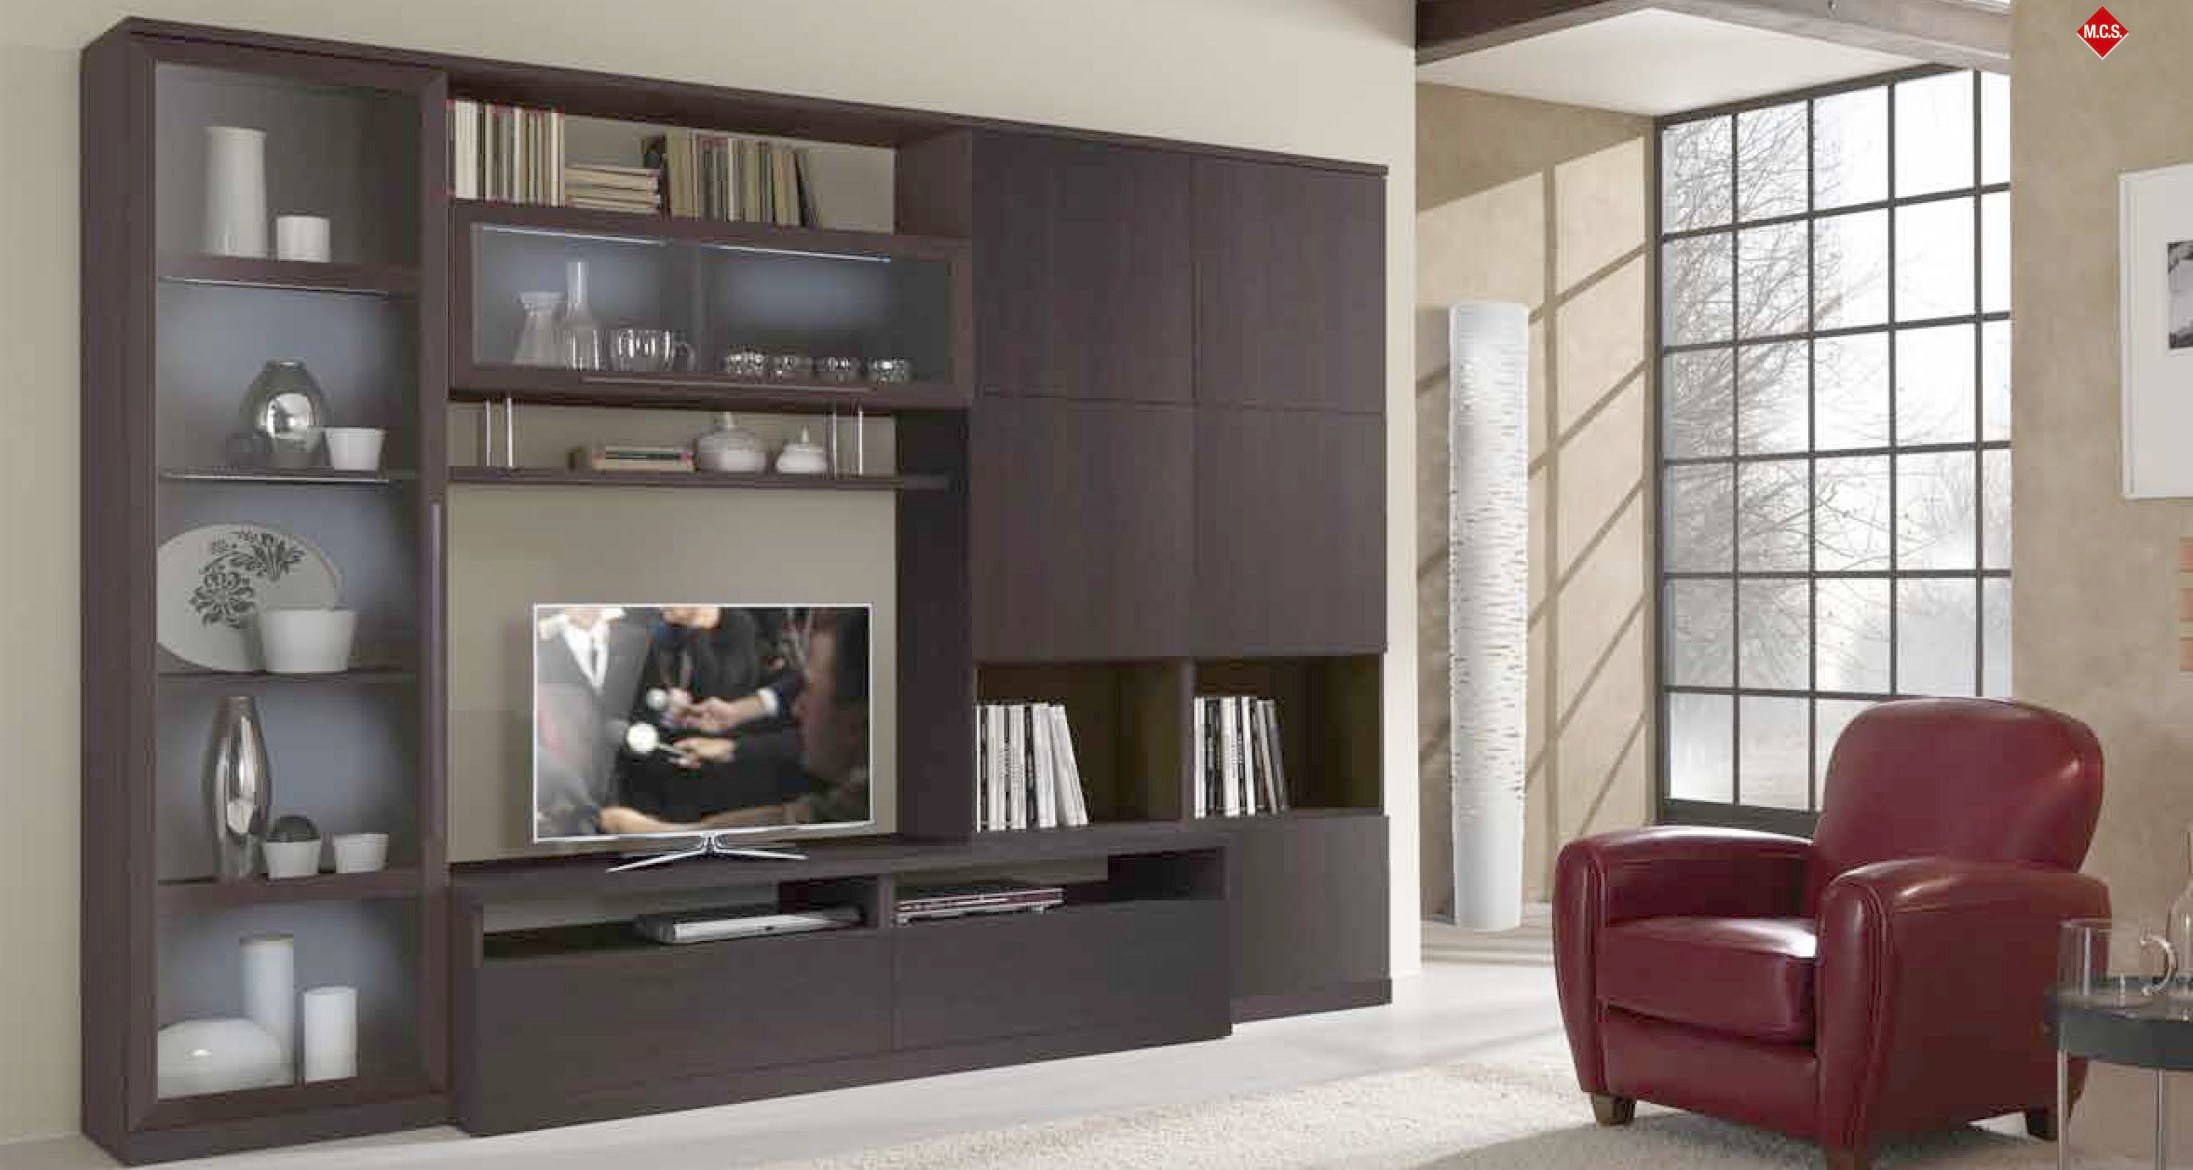 Awesome Modern Living Room Cabinet Designs Tv Unit Ideas Wall Mounted Tv Unit Designs Tv Unit Design For Living Room Tv Cabinet Designs For Living Room Tv Showcase Designs For Hall Tv Cupboard ...